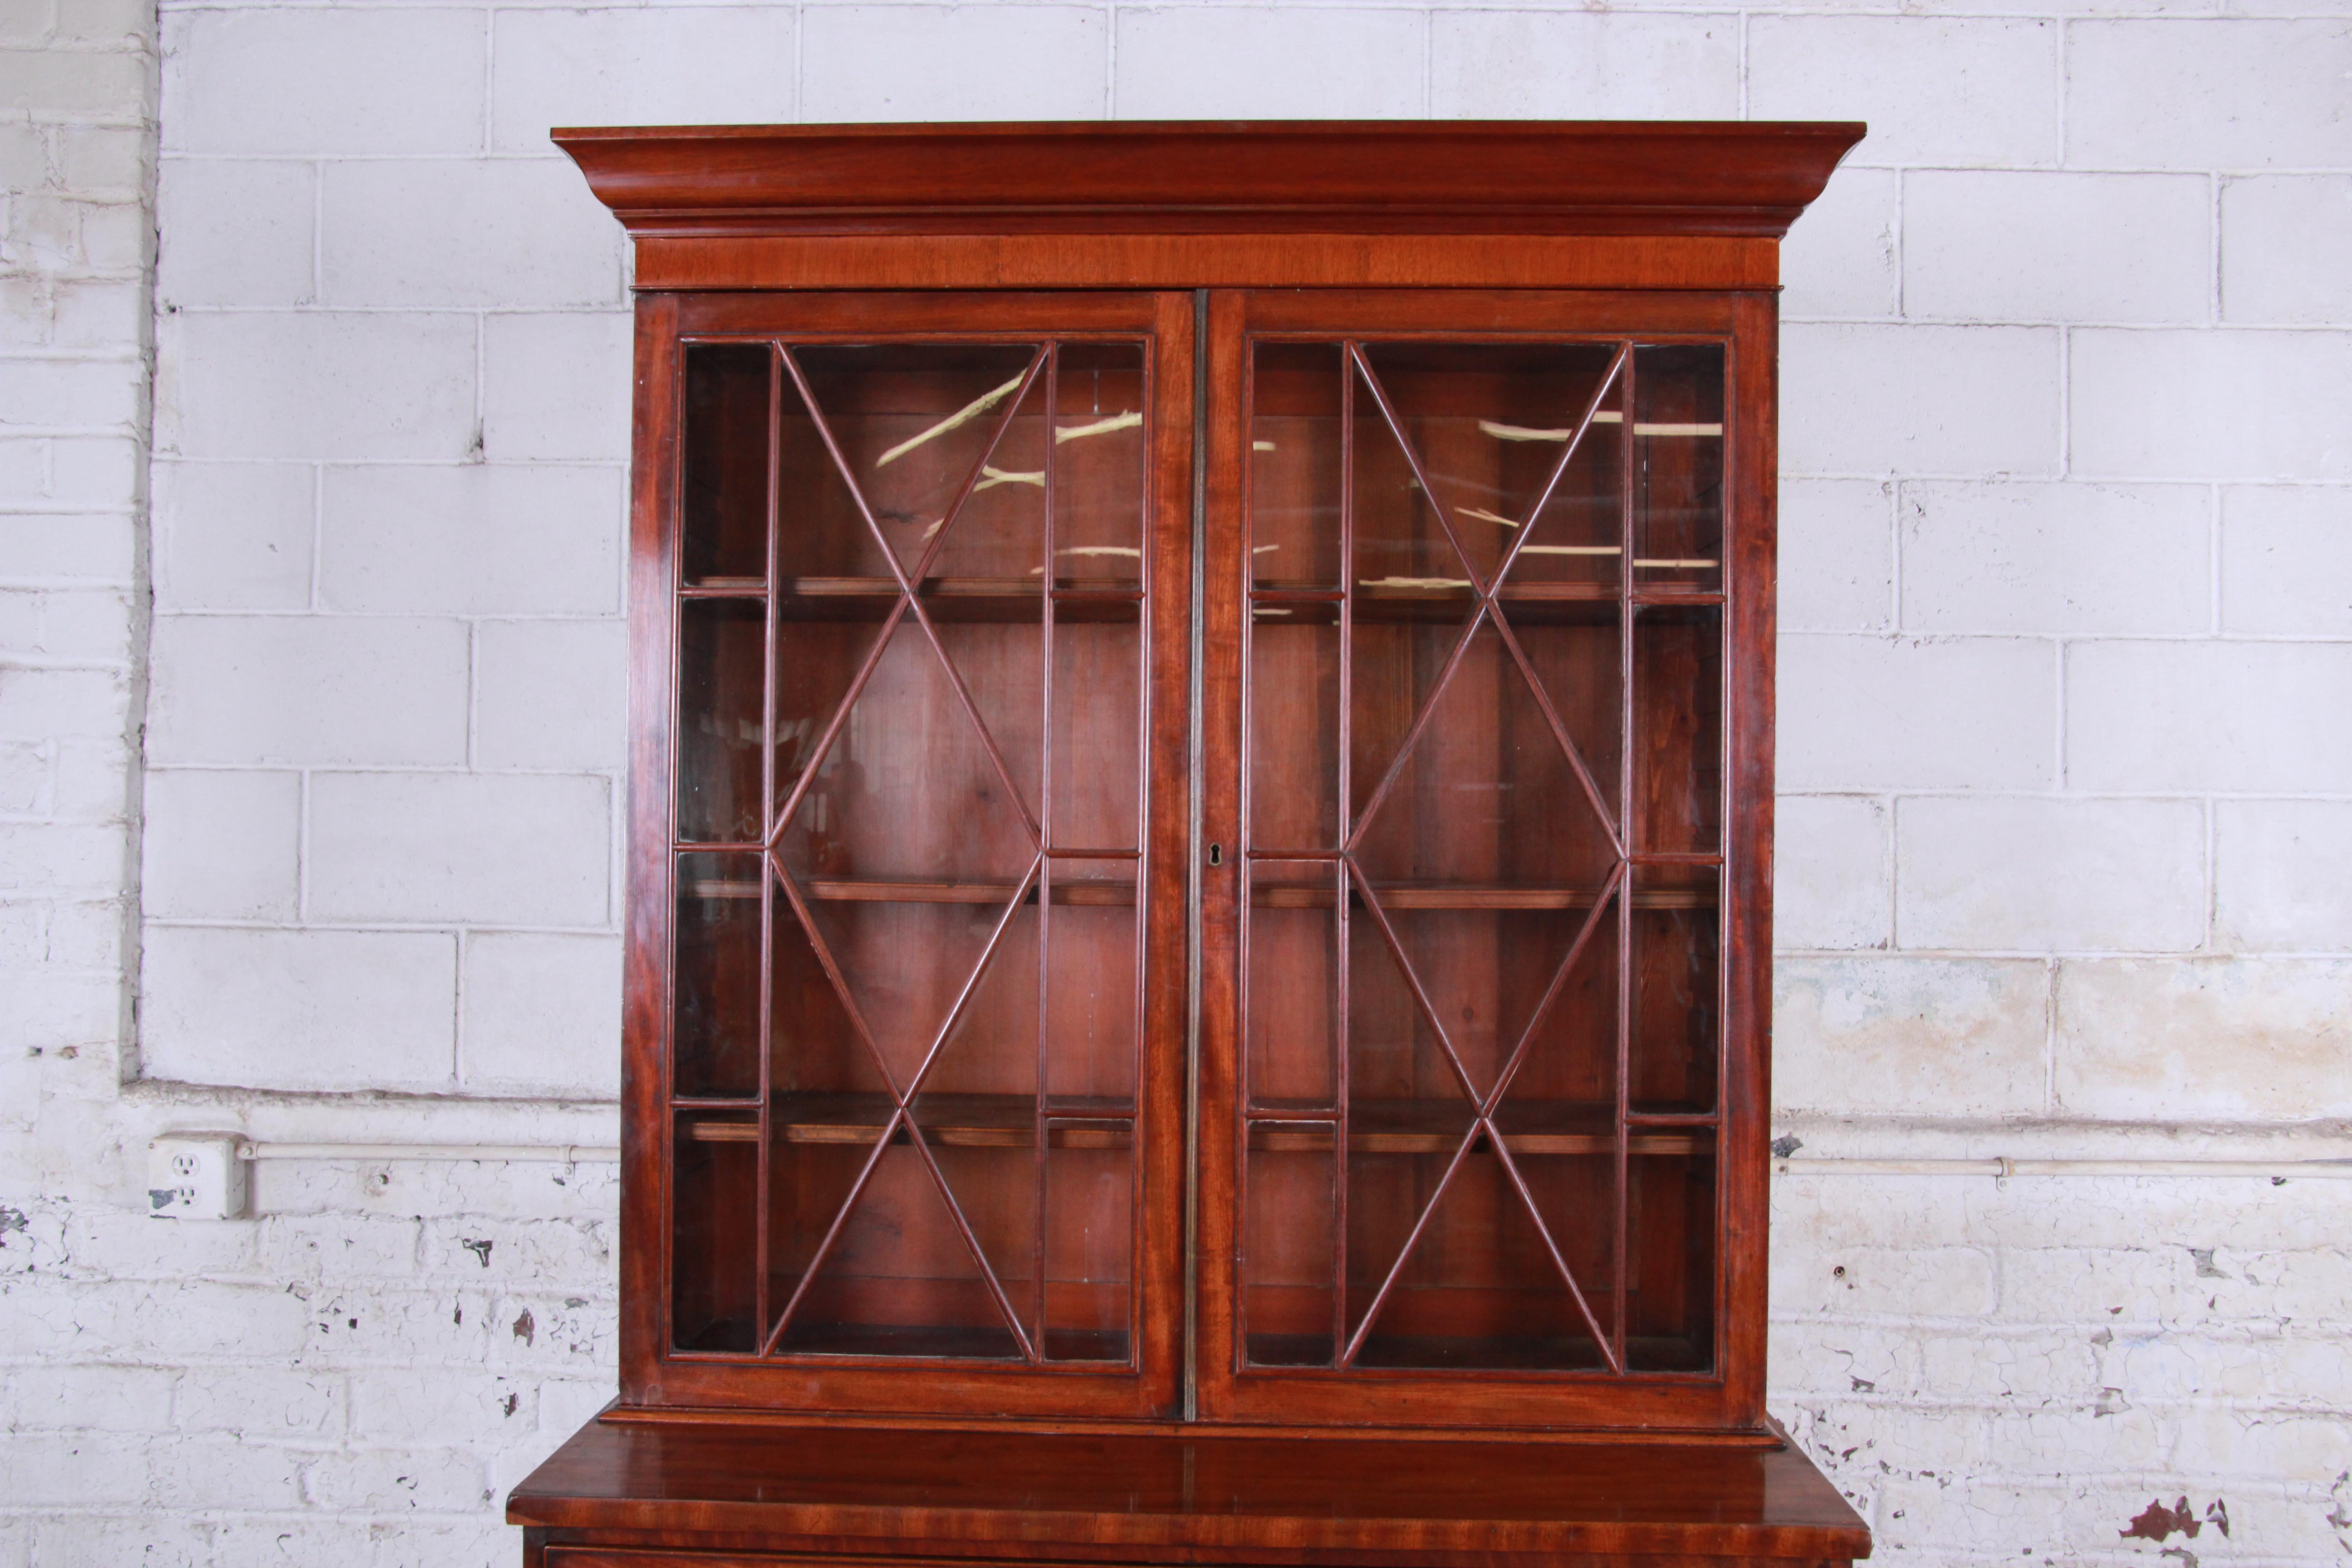 A gorgeous 19th century English George III style secretary desk with bookcase. The desk features beautiful mahogany wood grain, with cherrywood door fronts. It offers ample storage, with a glass front bookcase top with three adjustable shelves, a